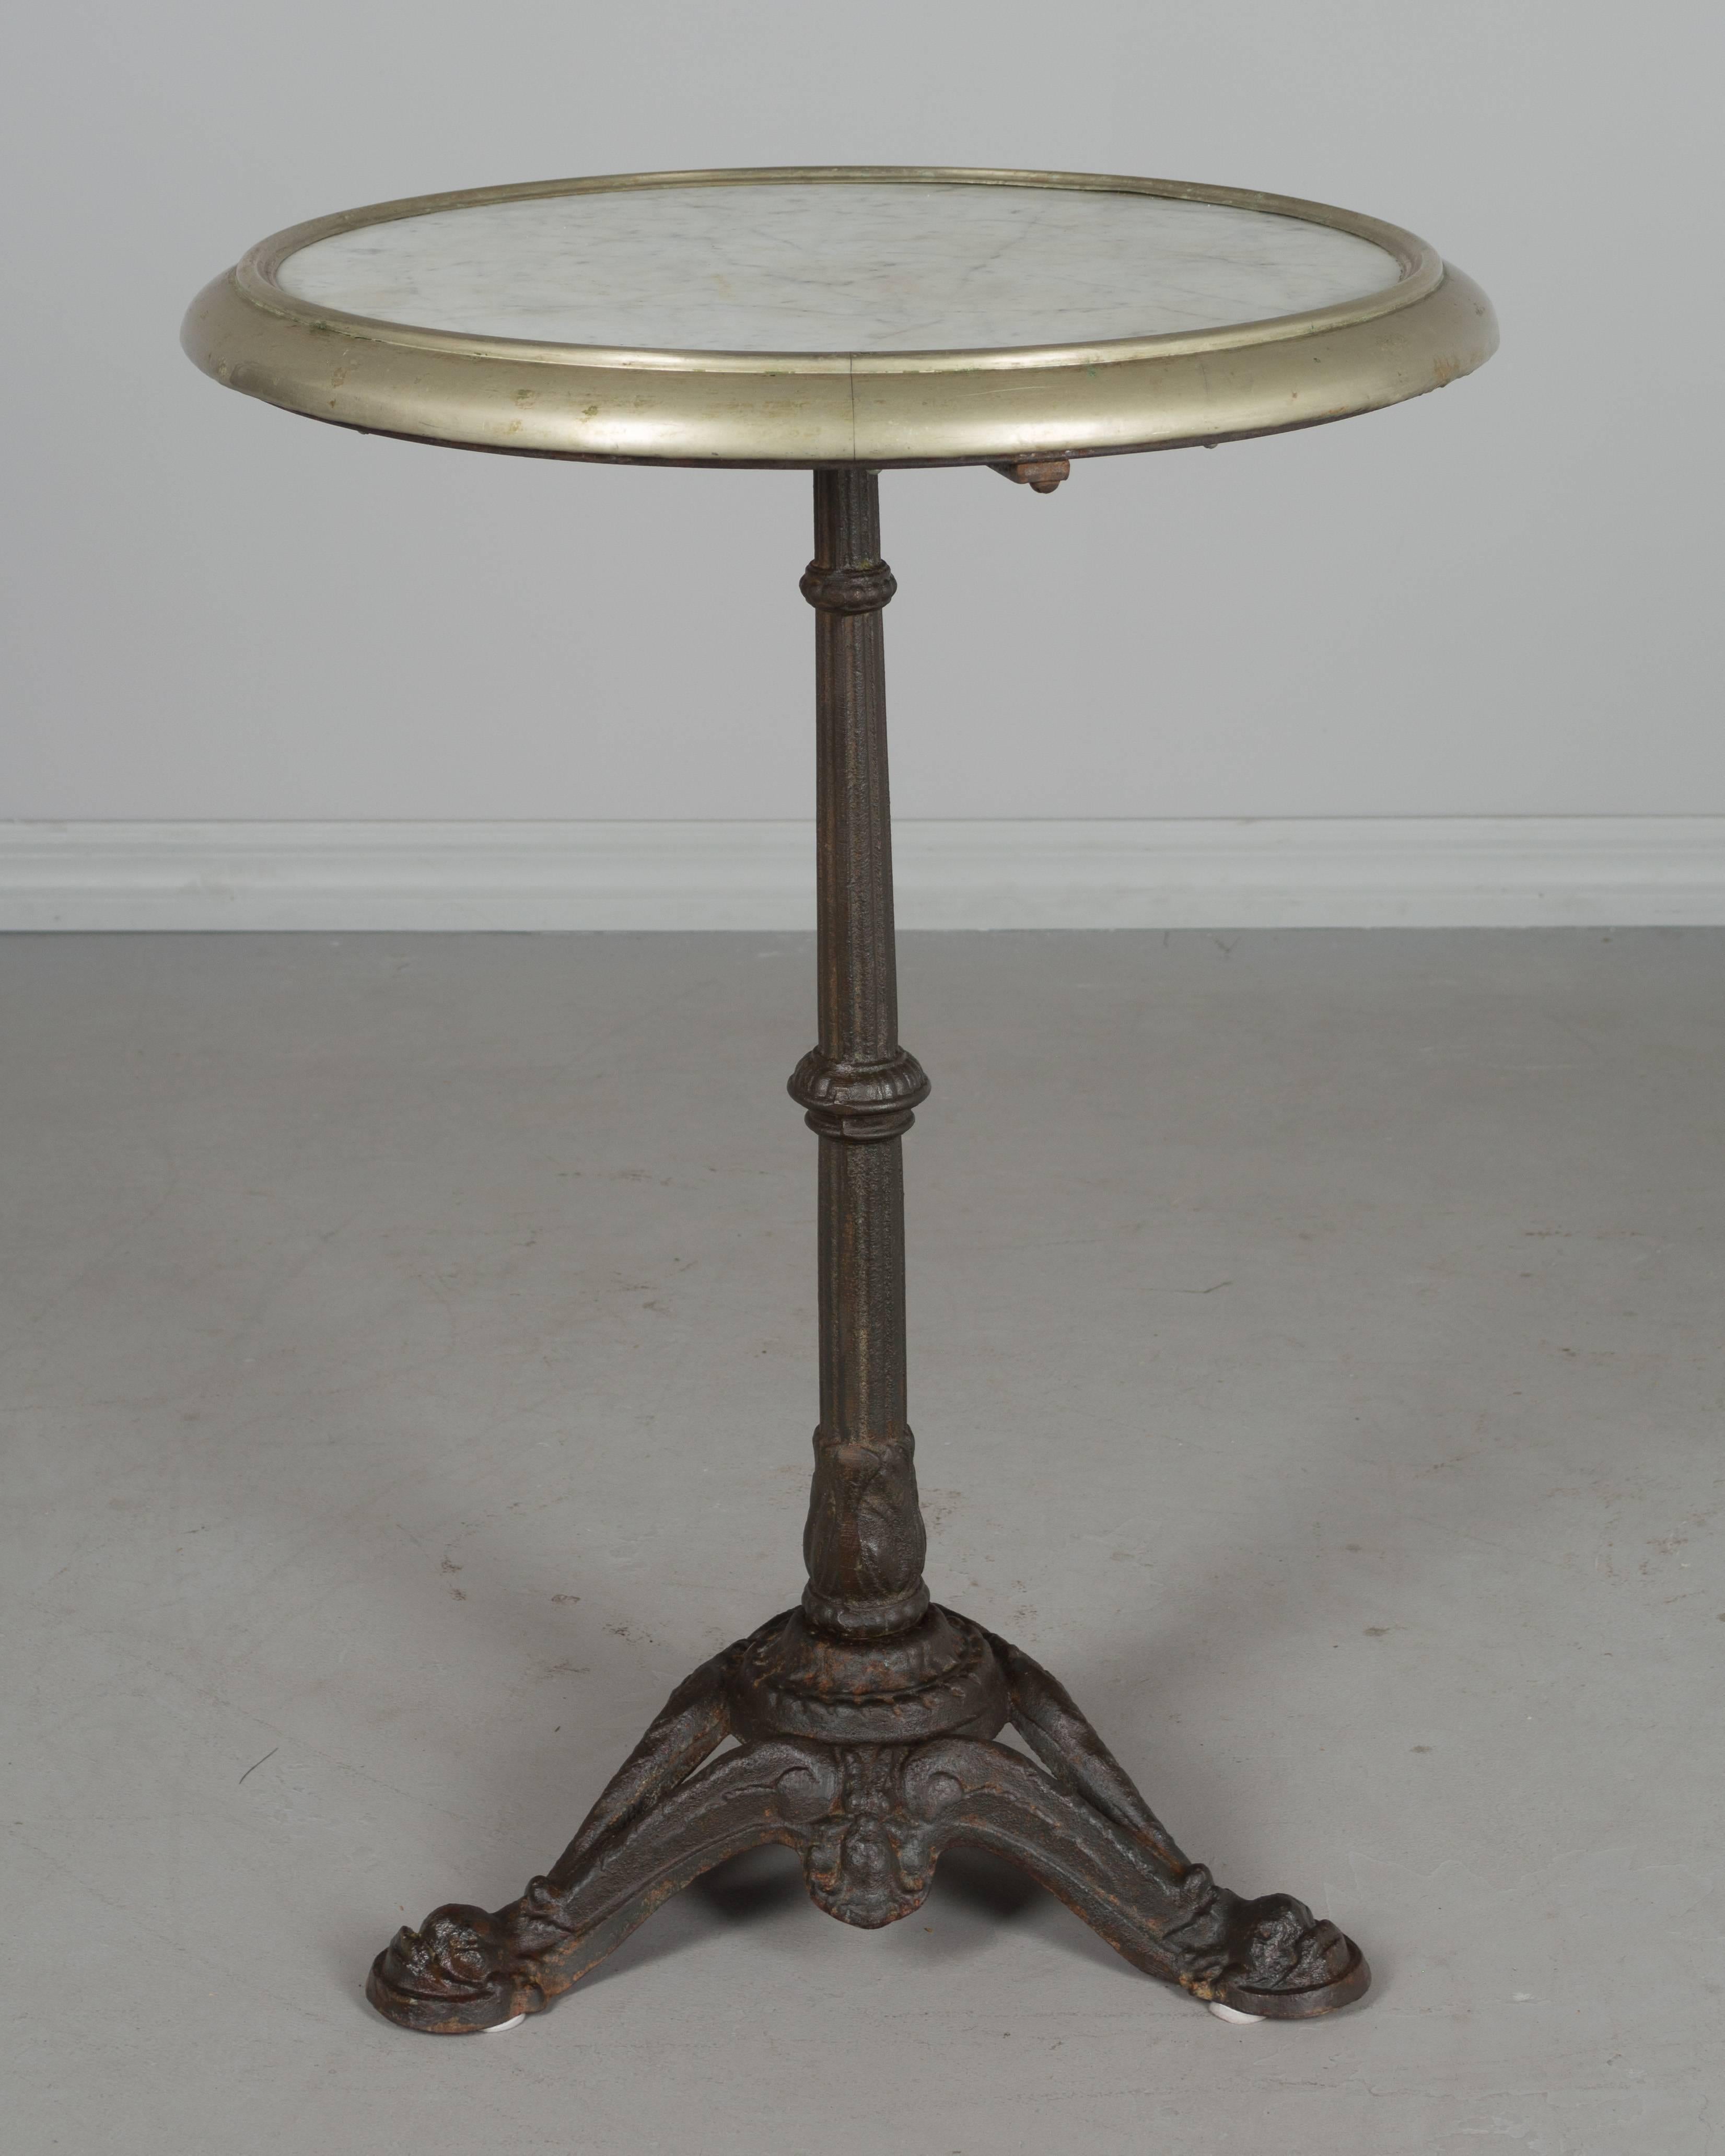 A 19th century French cast iron bistro table with beautiful warm patina. Original white marble top with brass rim. Very well made and in excellent condition. Weight: 41lbs.
More photos available upon request. We have a large selection of French